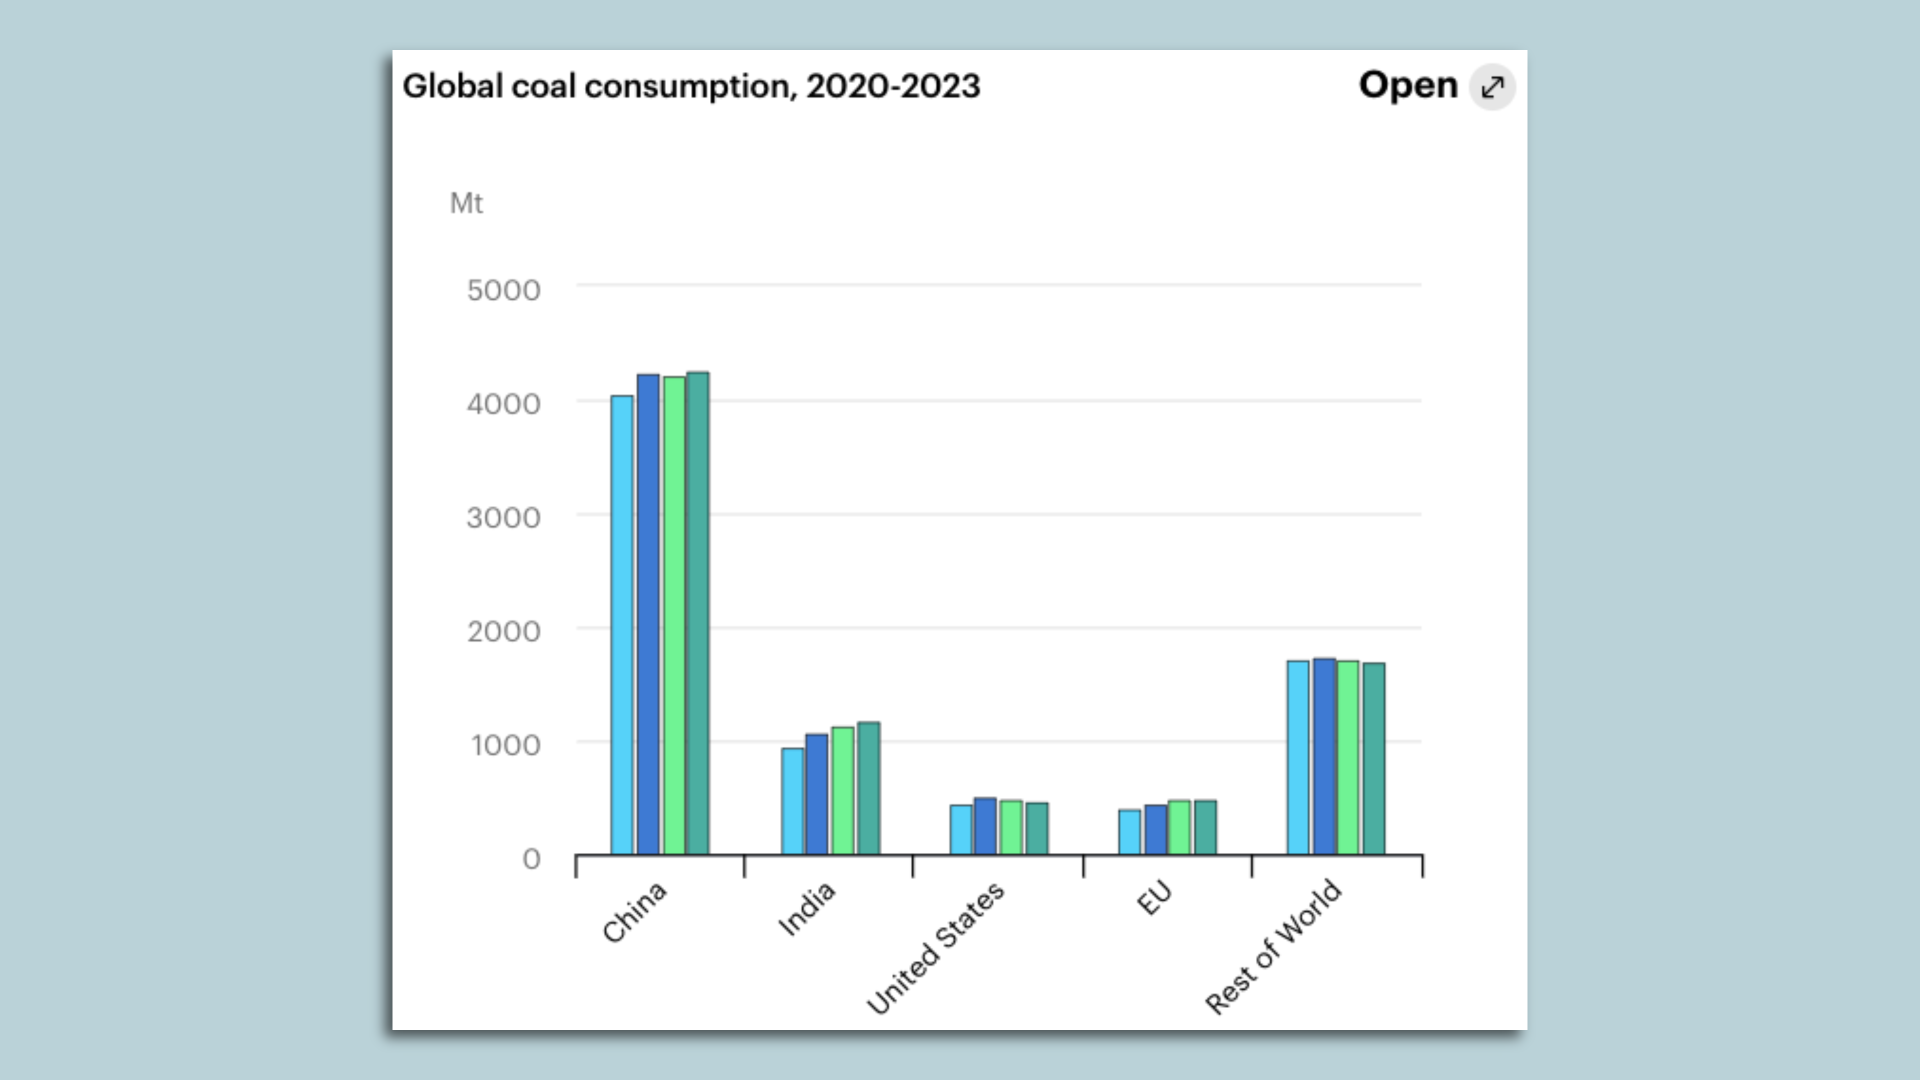 Image of the International Energy Agency's global coal demand projections